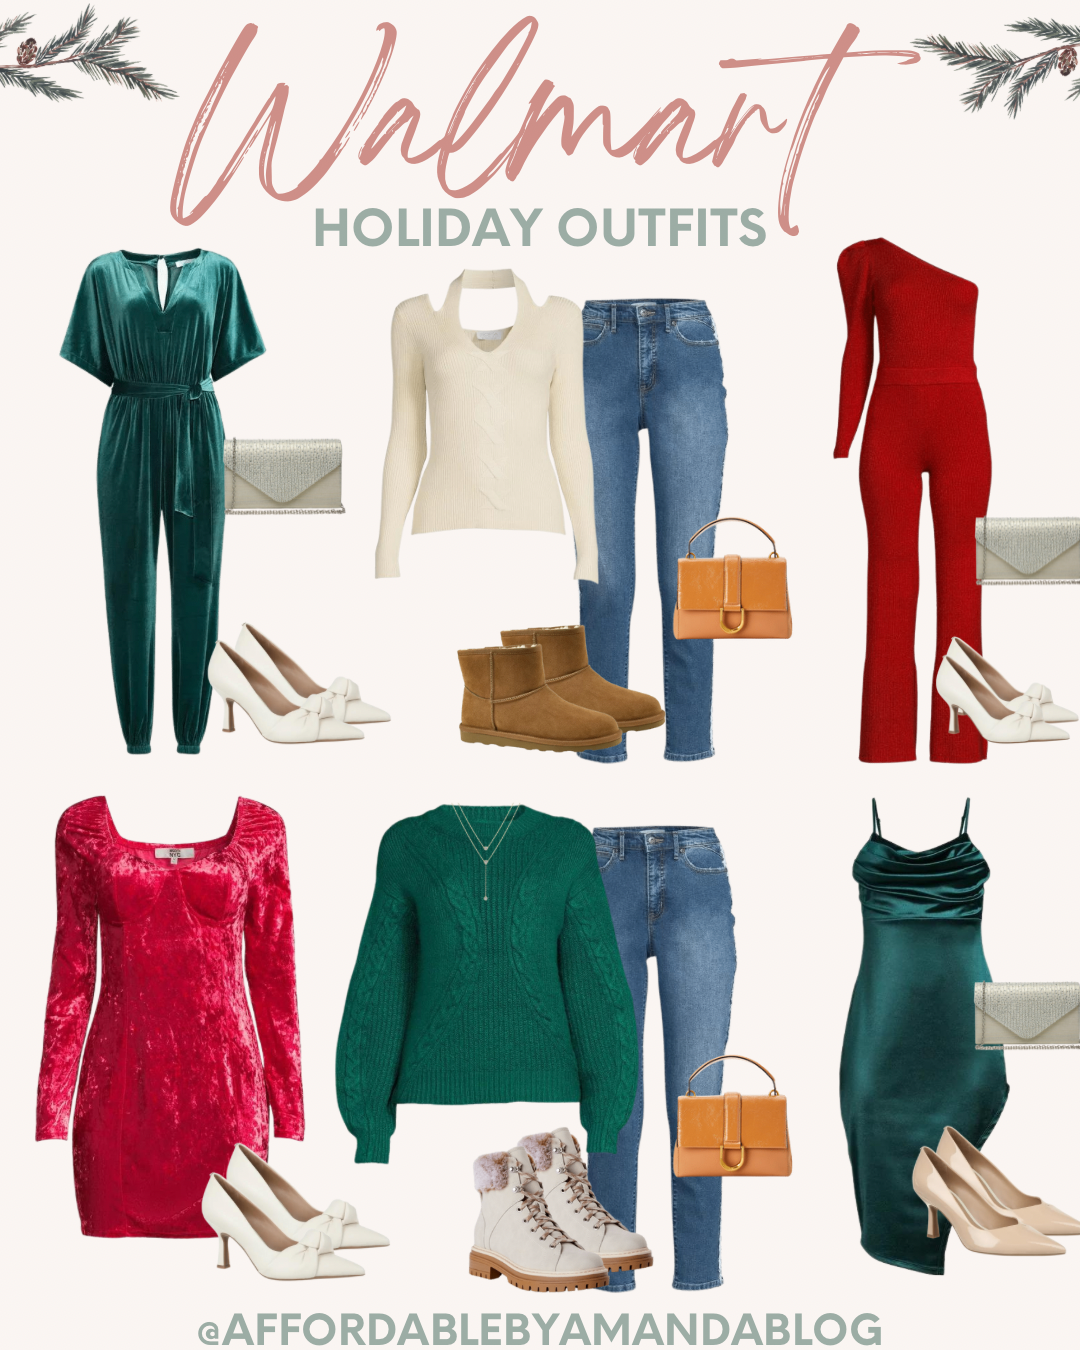 Holiday Outfit Ideas from Walmart | Walmart Outfit Ideas 2022